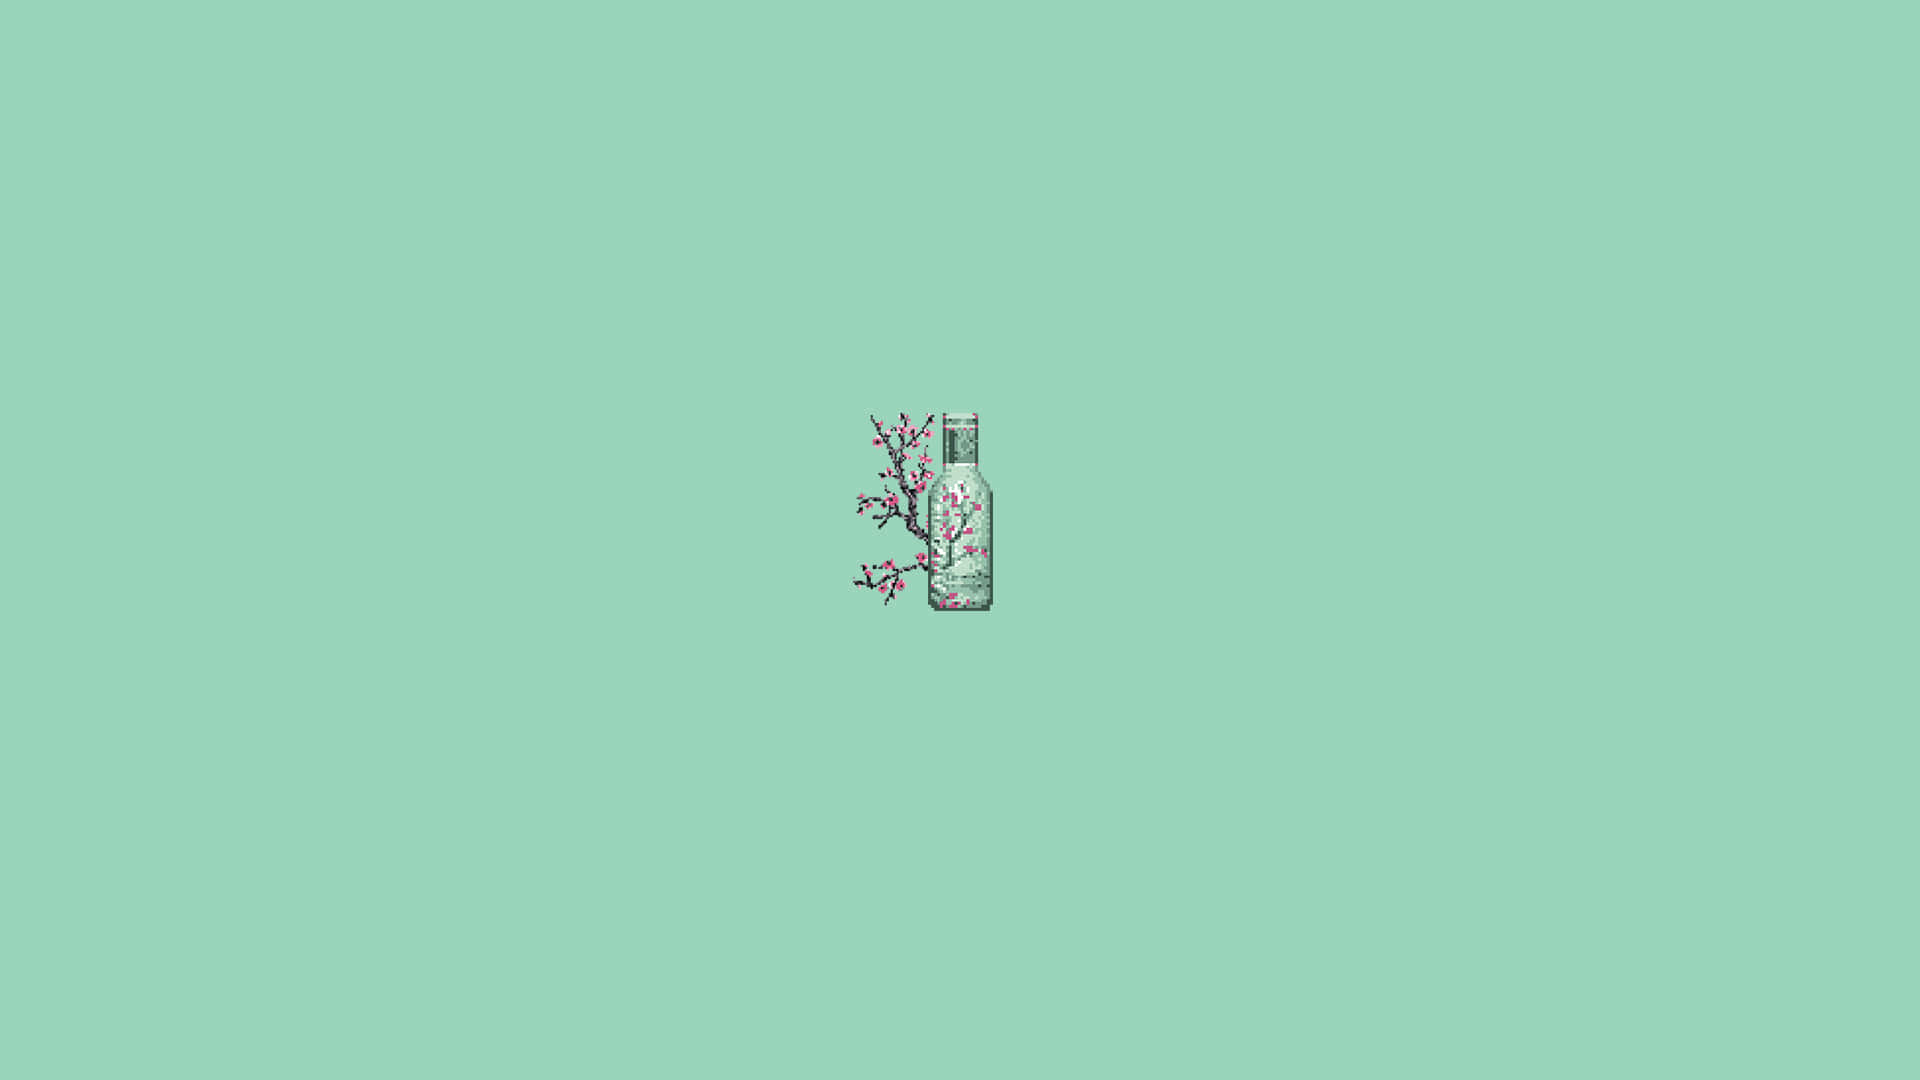 Blue Green Aesthetic Plant And Bottle Drawing Wallpaper